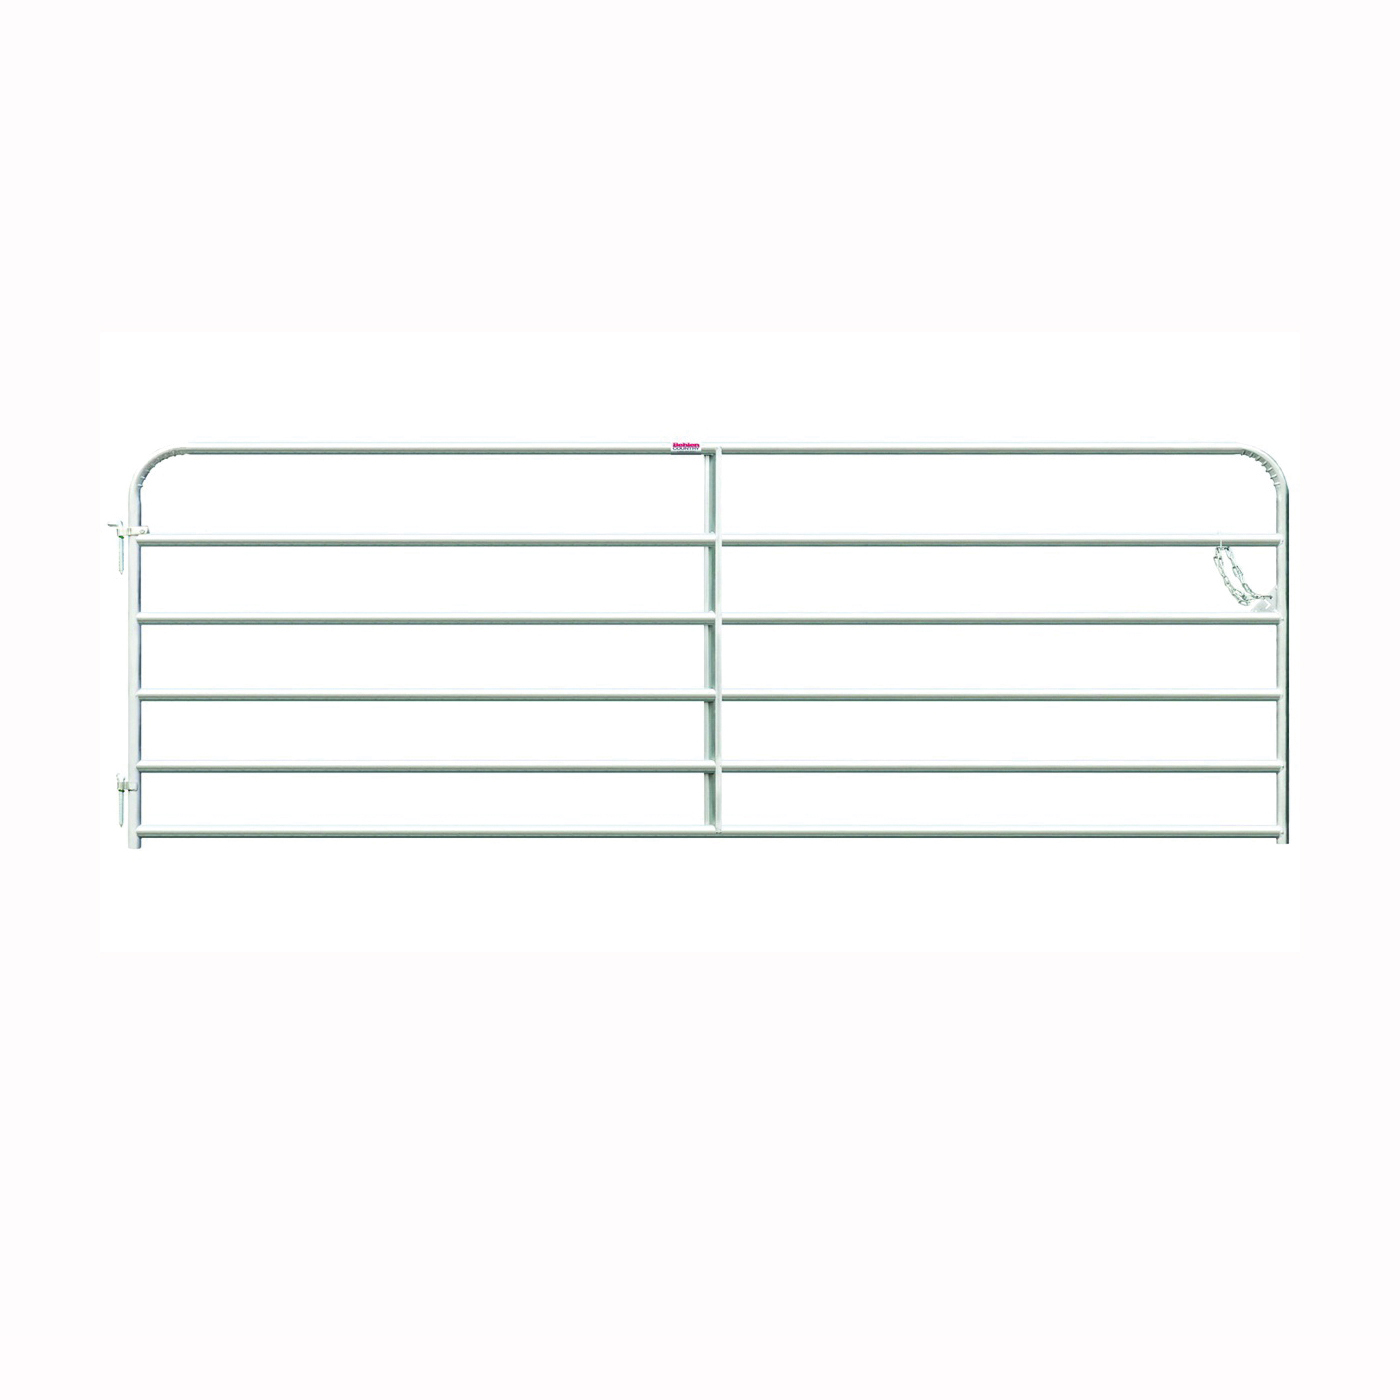 Behlen Country 40113108 Gate, 120 in W Gate, 50 in H Gate, 20 ga Frame Tube/Channel, Steel Frame